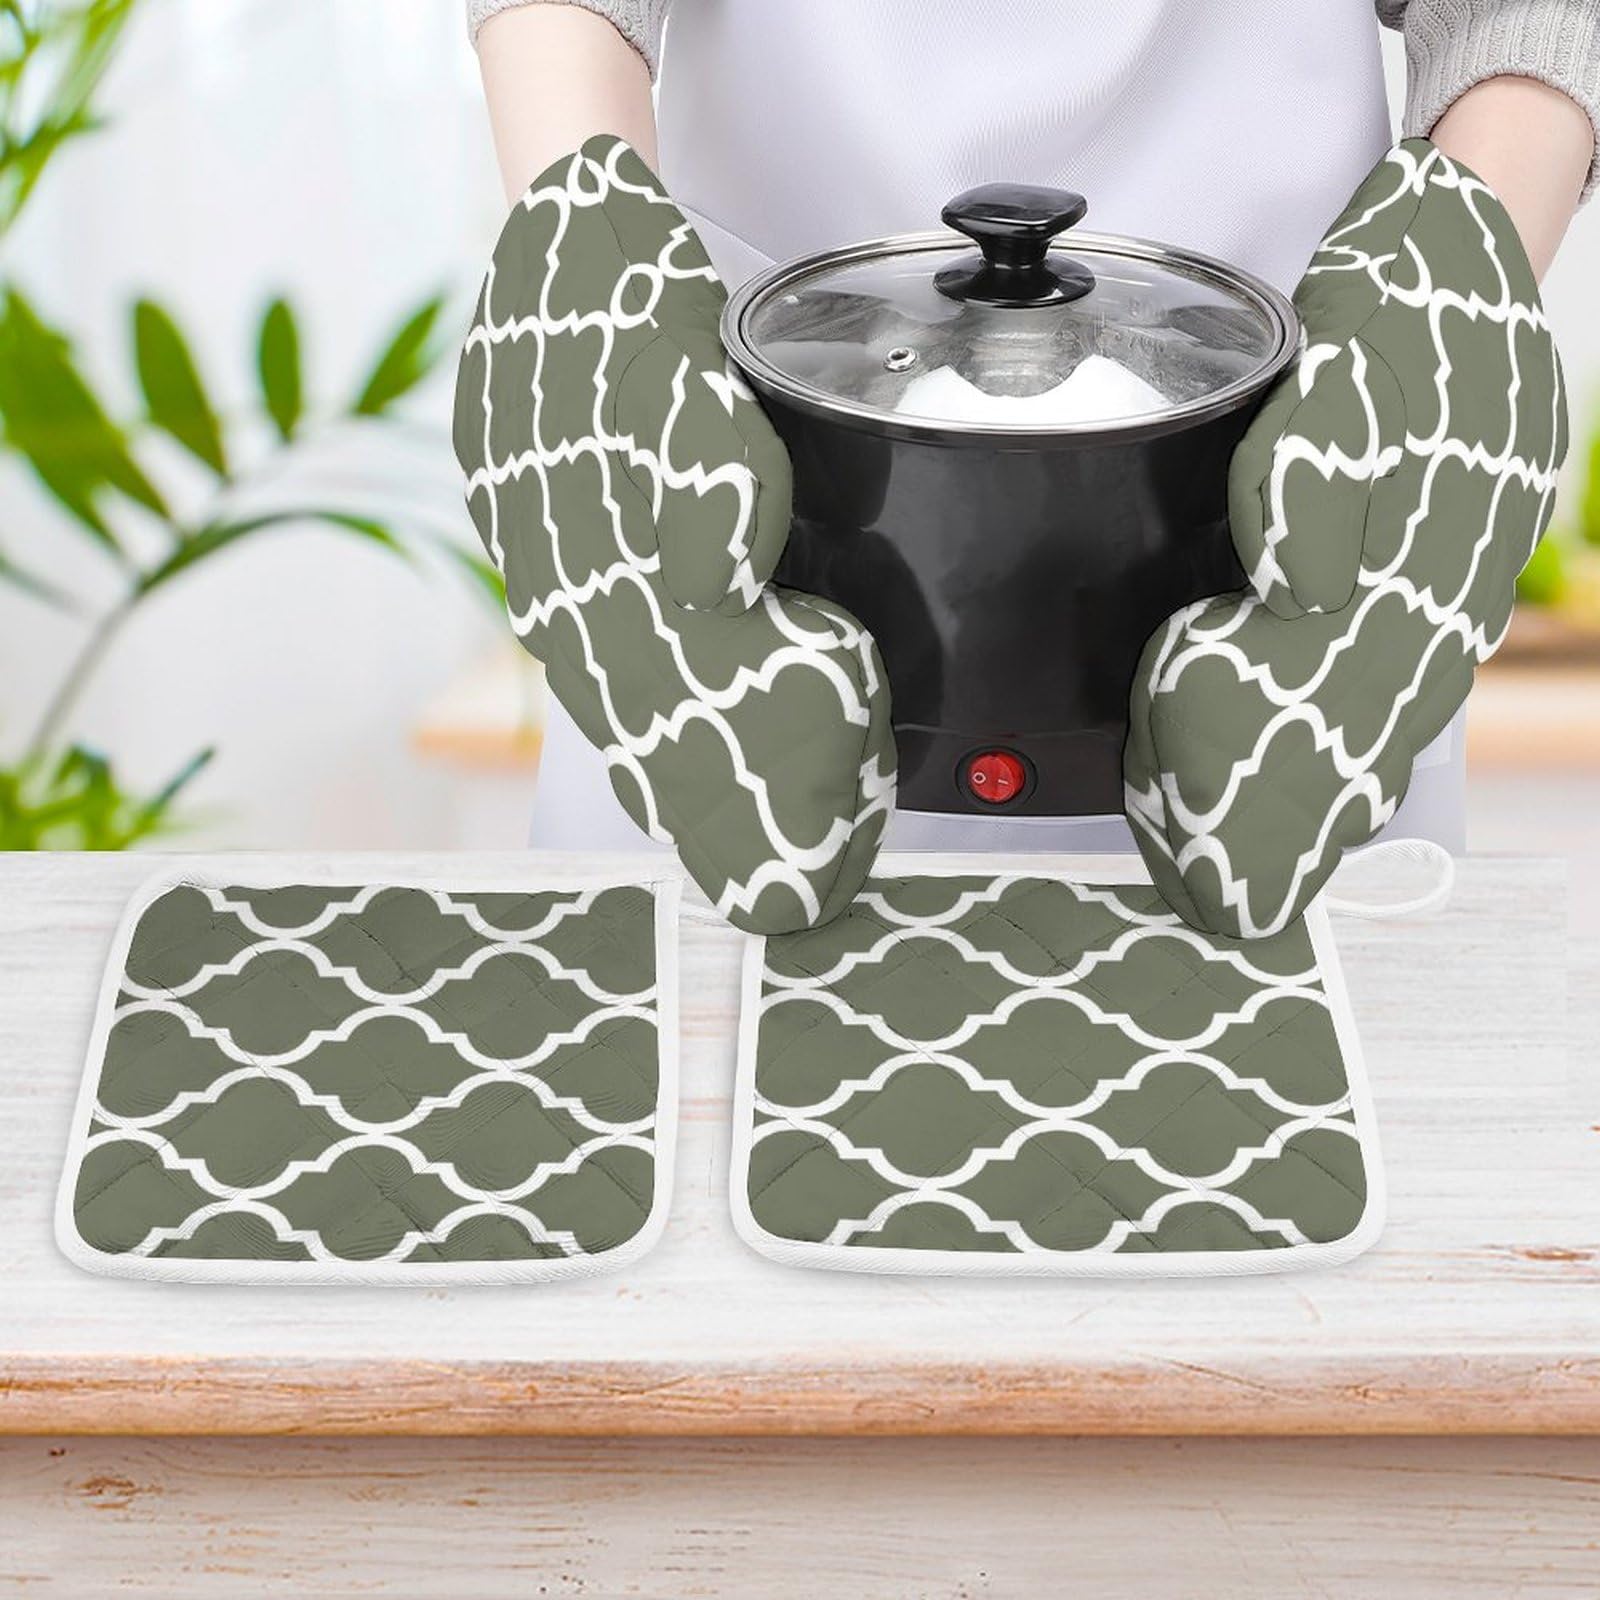 4Pcs Oven Mitts and Pot Holders Set, Classic Quatrefoil Pattern Olive Green and White Oven Mitts Gloves Set Heat Resistant Hot Pads for Kitchen Cooking Grill